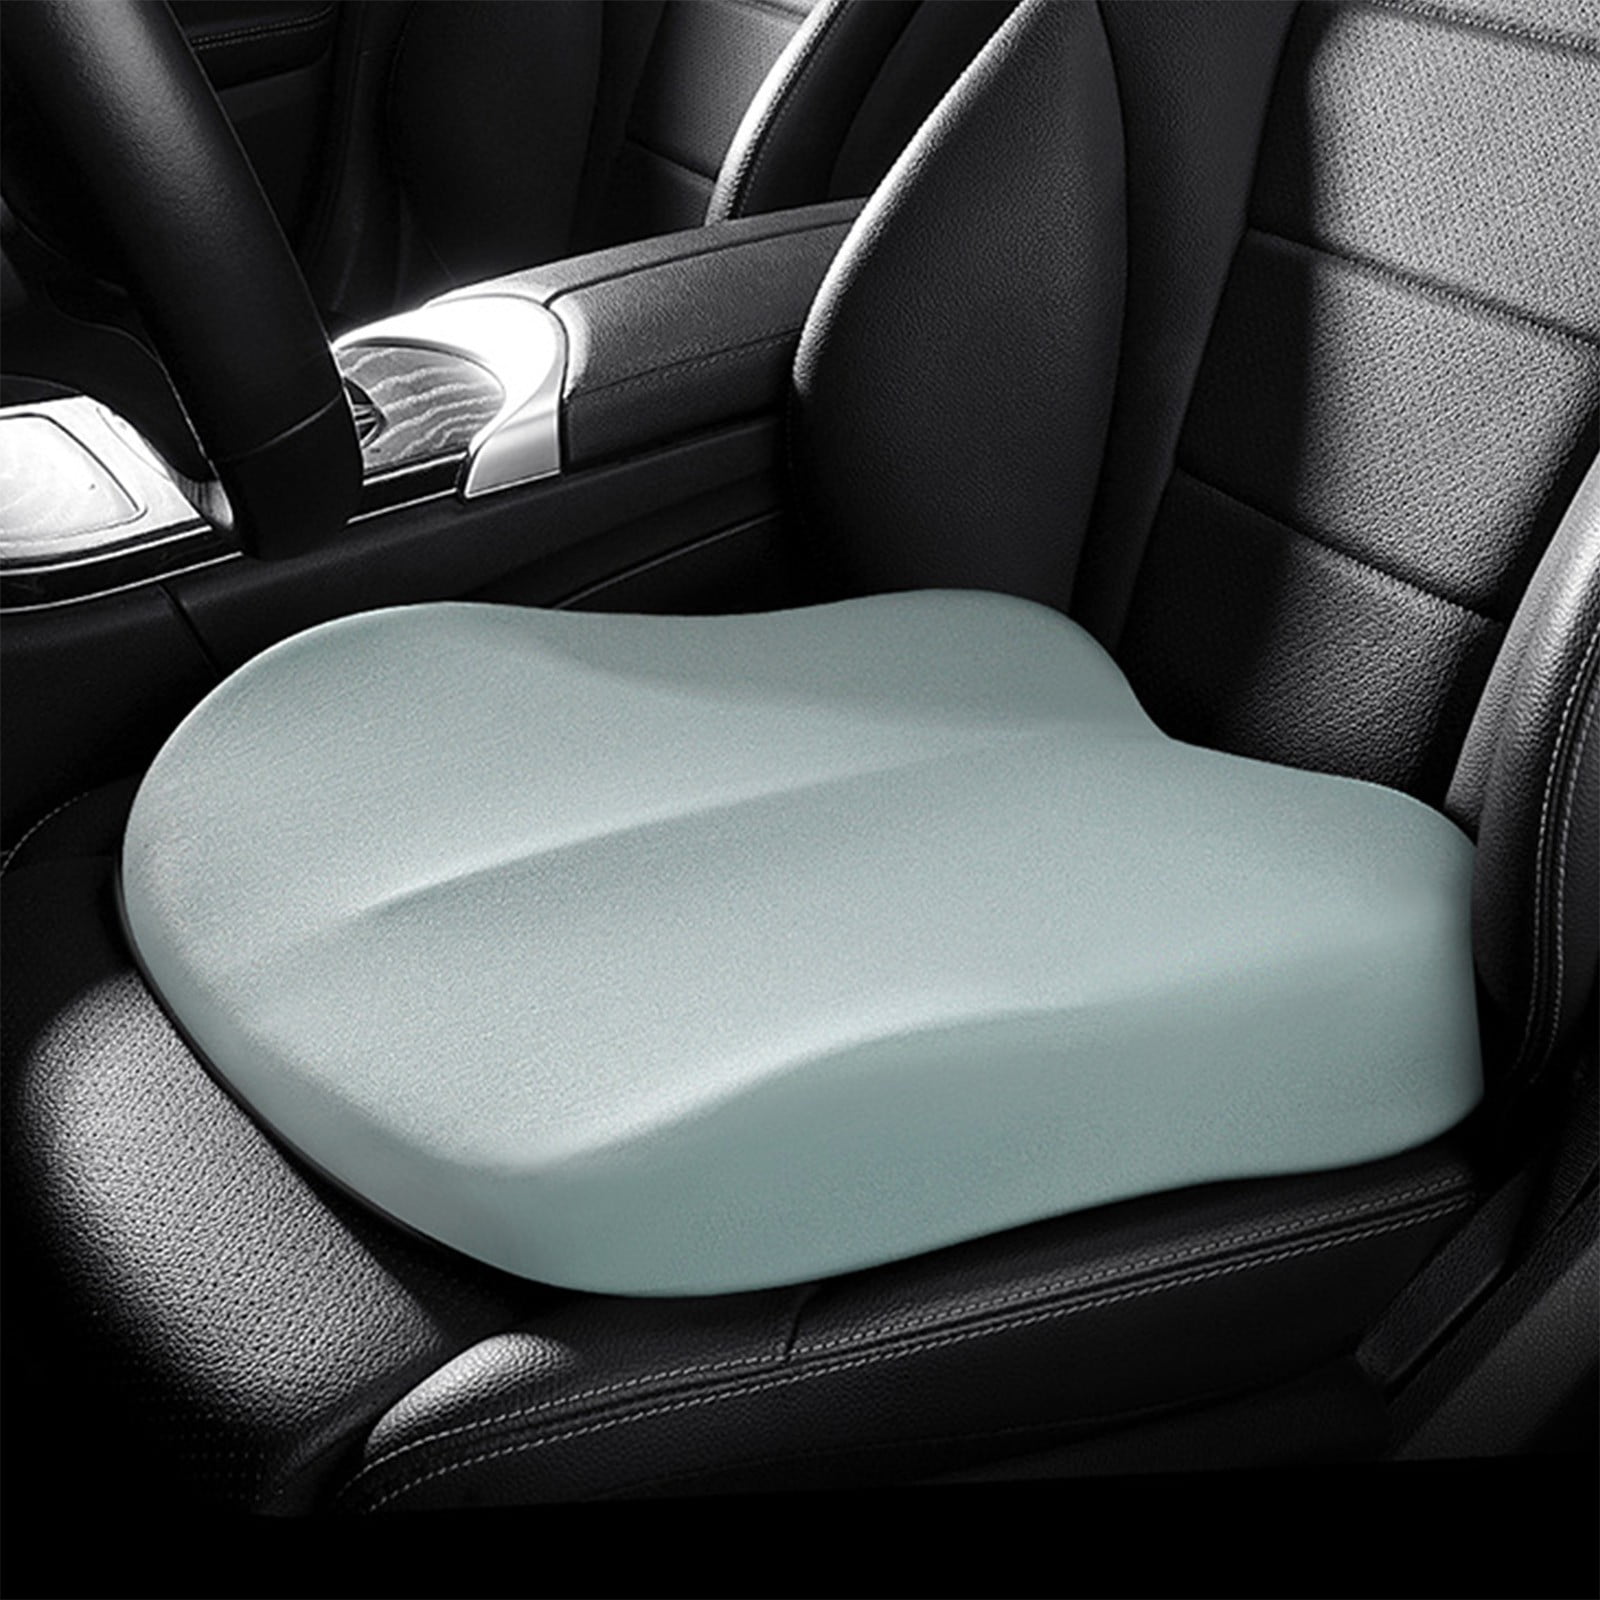 NEXPURE Memory Foam Seat Cushion Cooling Gel Butt Pillow for